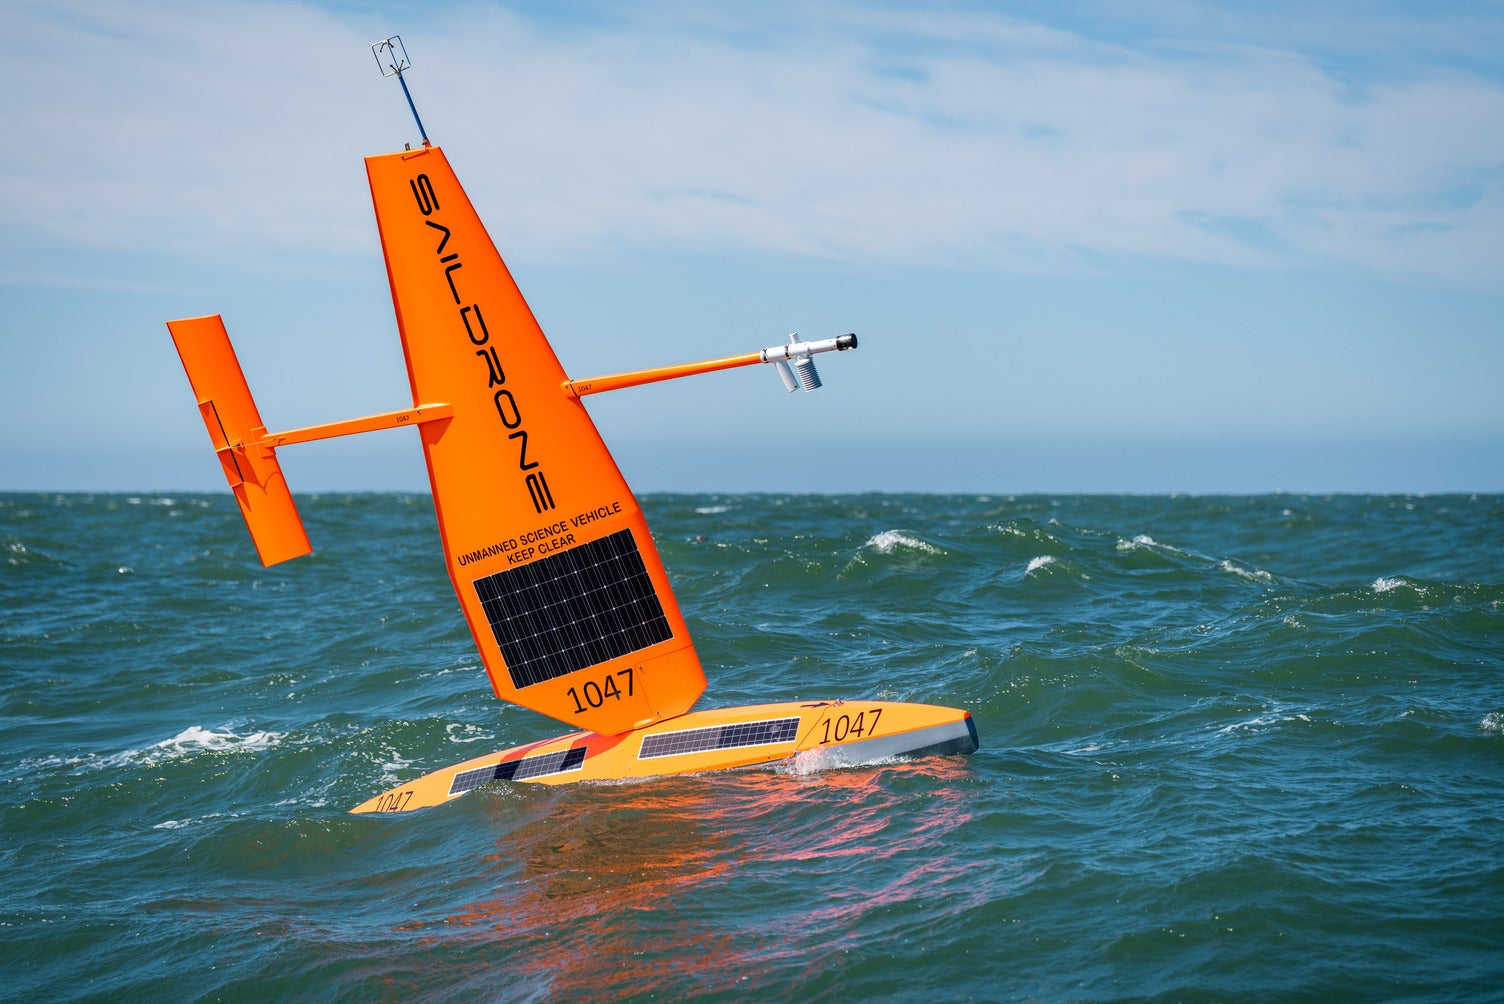 A Saildrone sails in rough seas. The drone is a bright orange boat without any people and has numerous scientific instruments attached to its sail made of hard materials (instead of fabric). .